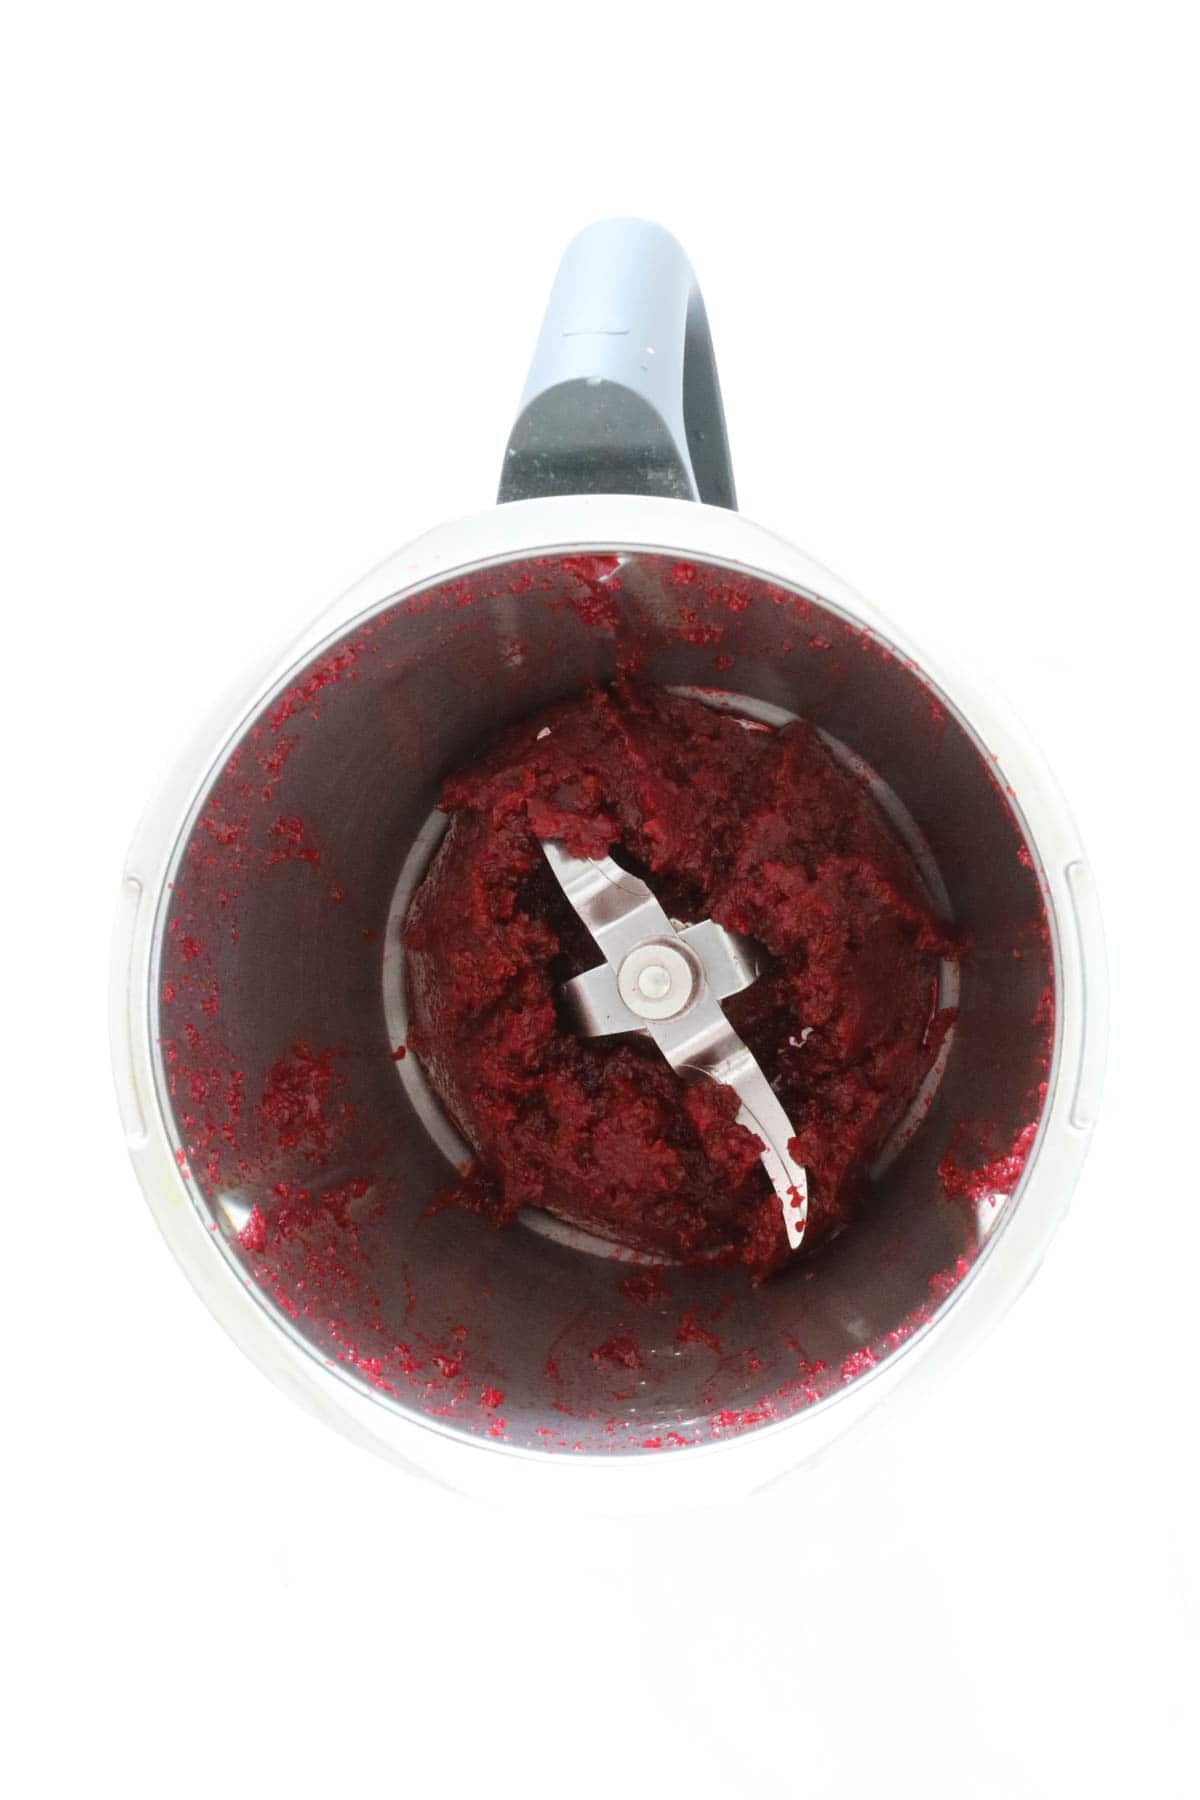 Pureed beetroot in a Thermomix.